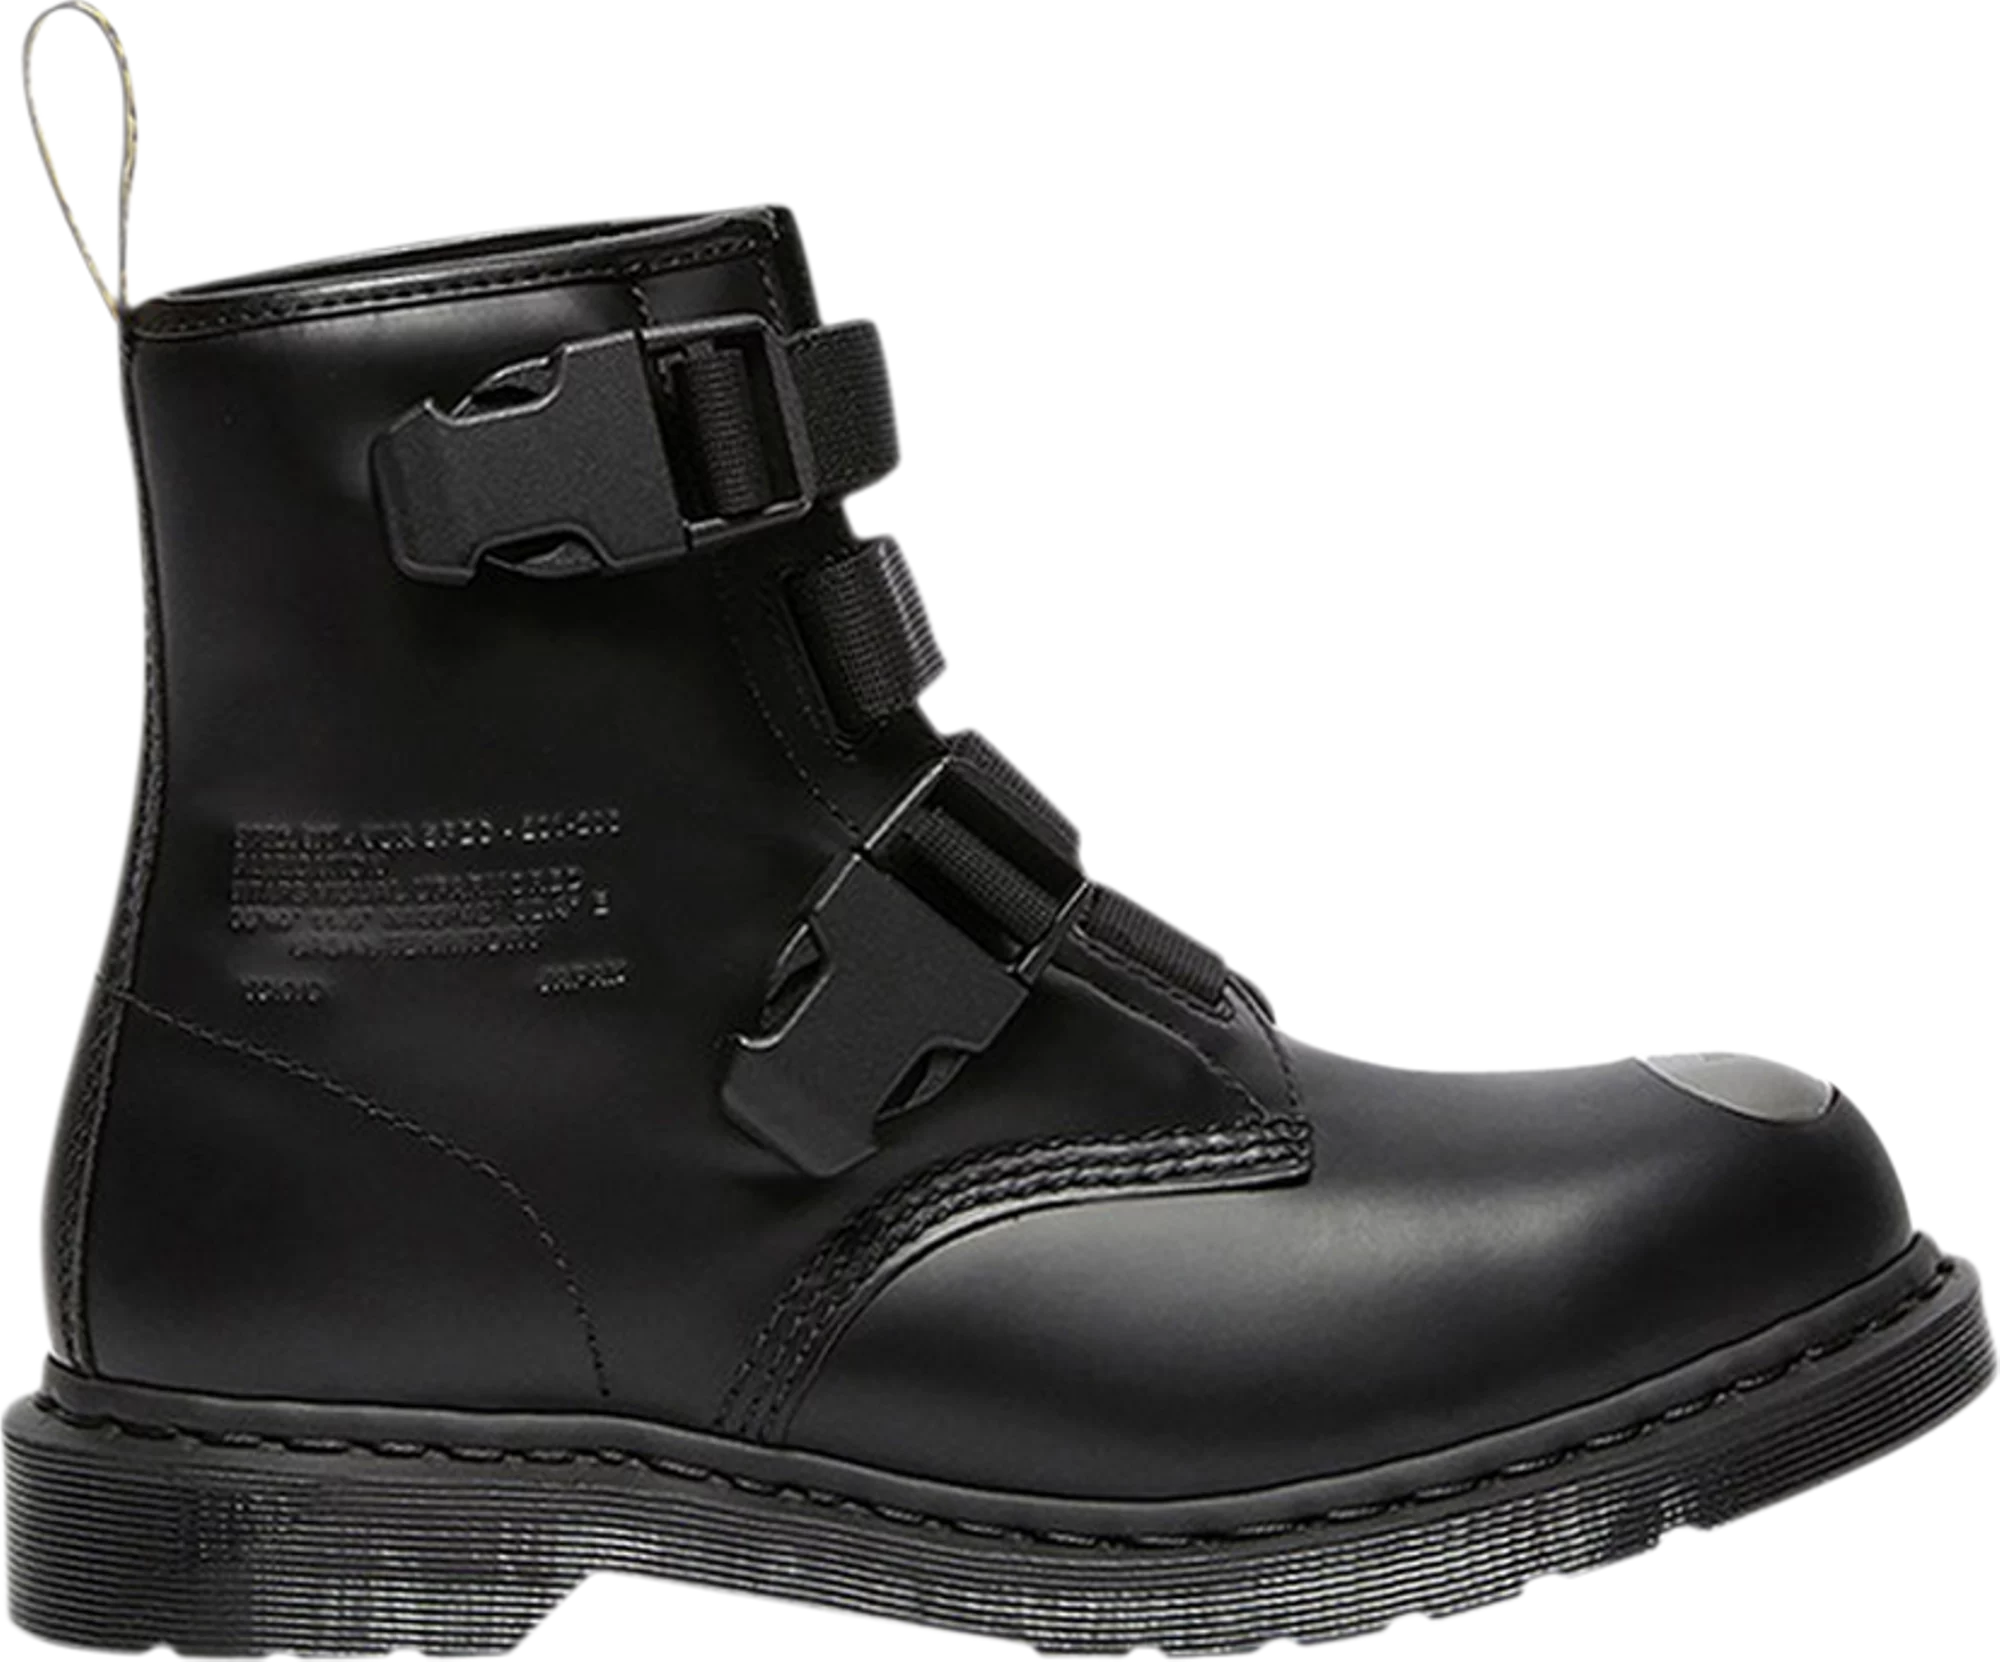 Dr. Martens 1460 "x WTAPS Remastered Boot Black" 2020